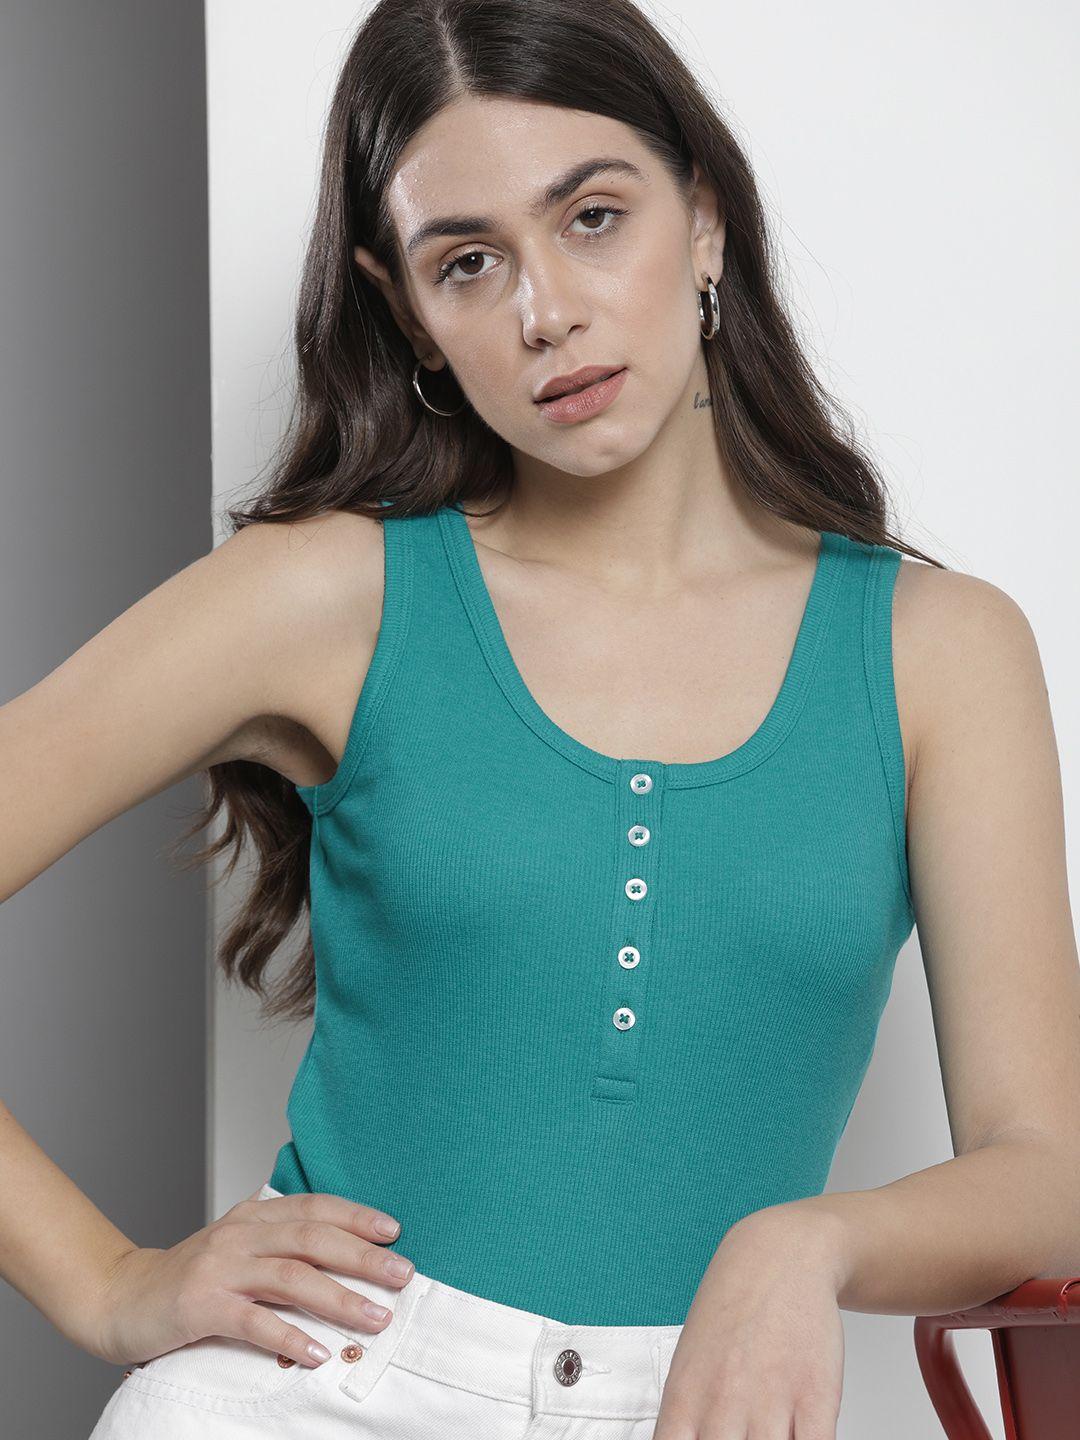 nautica teal green solid round neck knitted tank top